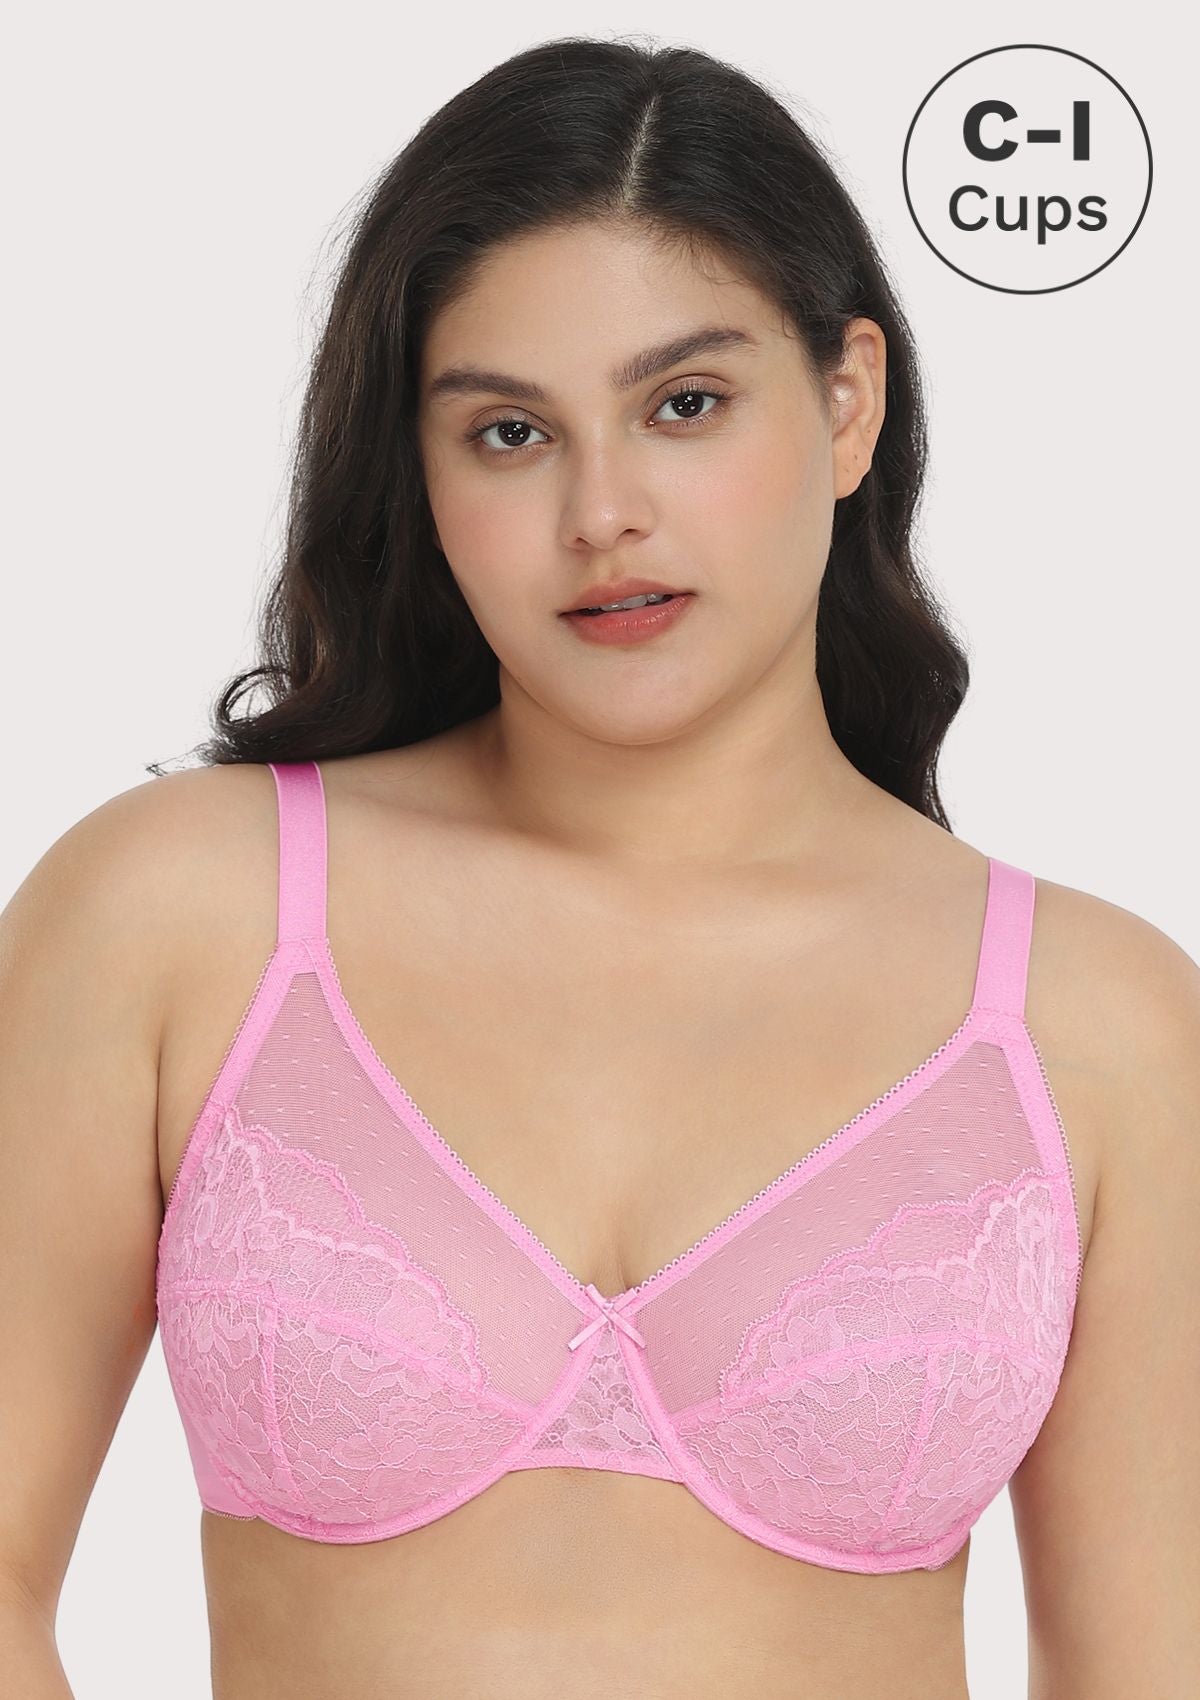 HSIA Enchante Lacy Bra: Comfy Sheer Lace Bra With Lift - Dusty Peach / 38 / G